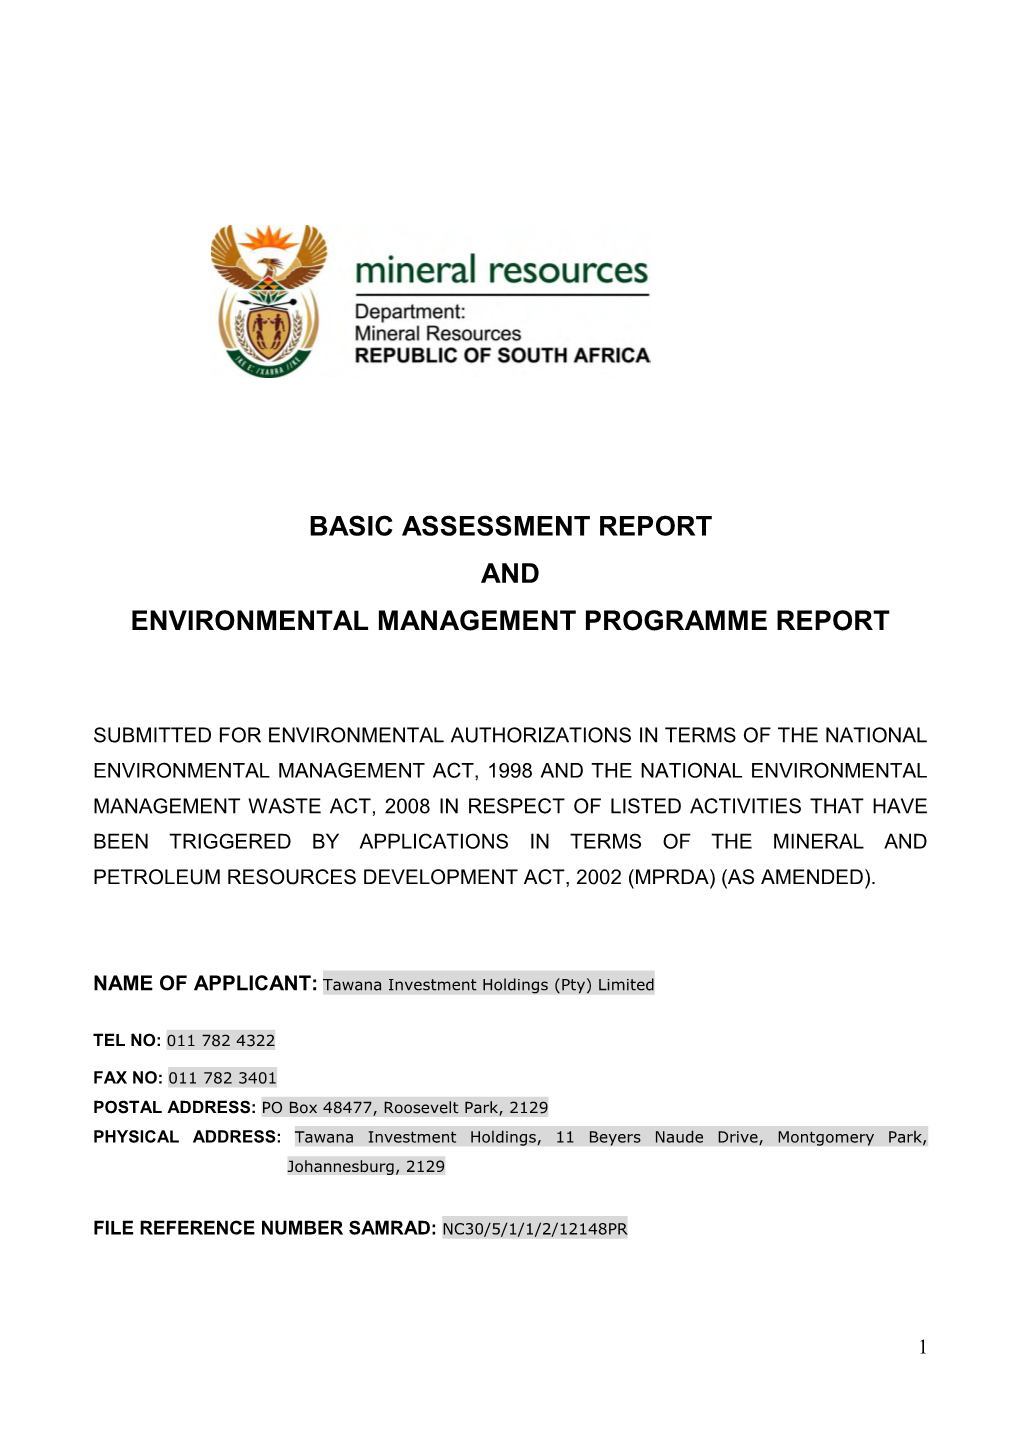 Basic Assessment Report and Environmental Management Programme Report